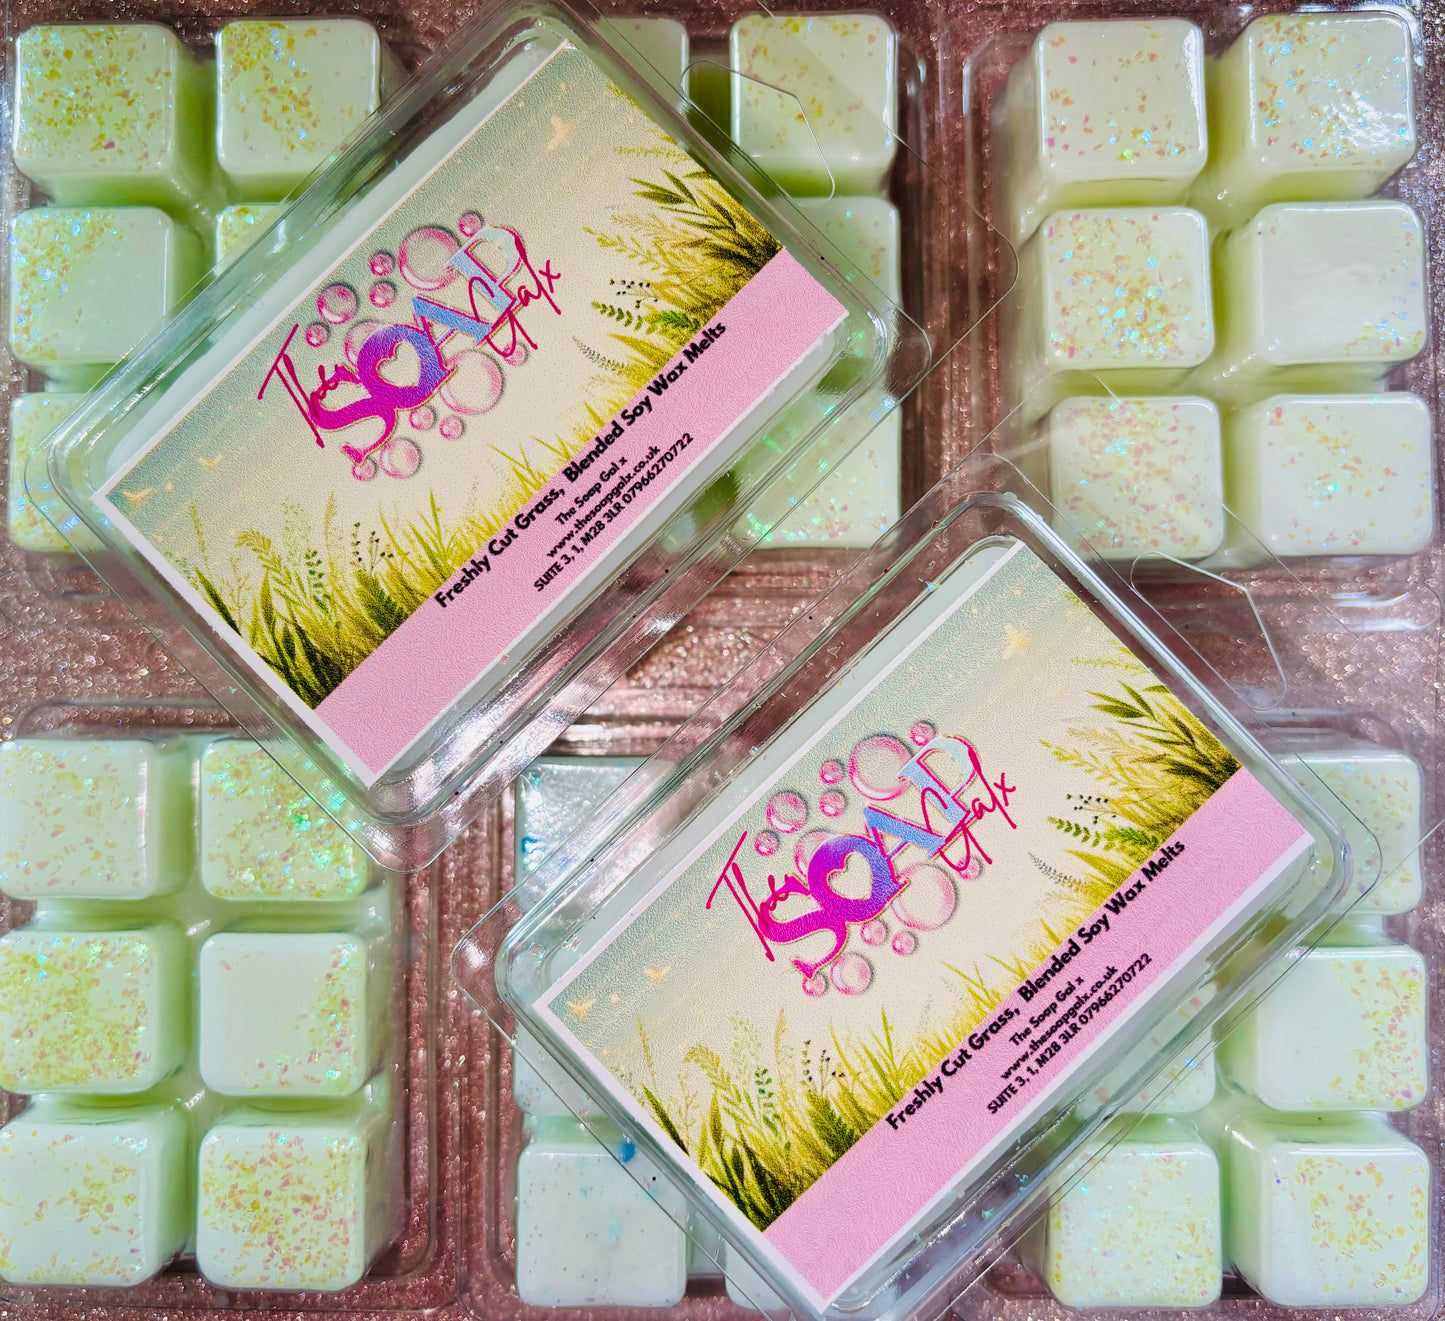 Packaged Fresh Cut Grass Wax Melts by The Soap Gal x arranged next to an open container displaying the product.